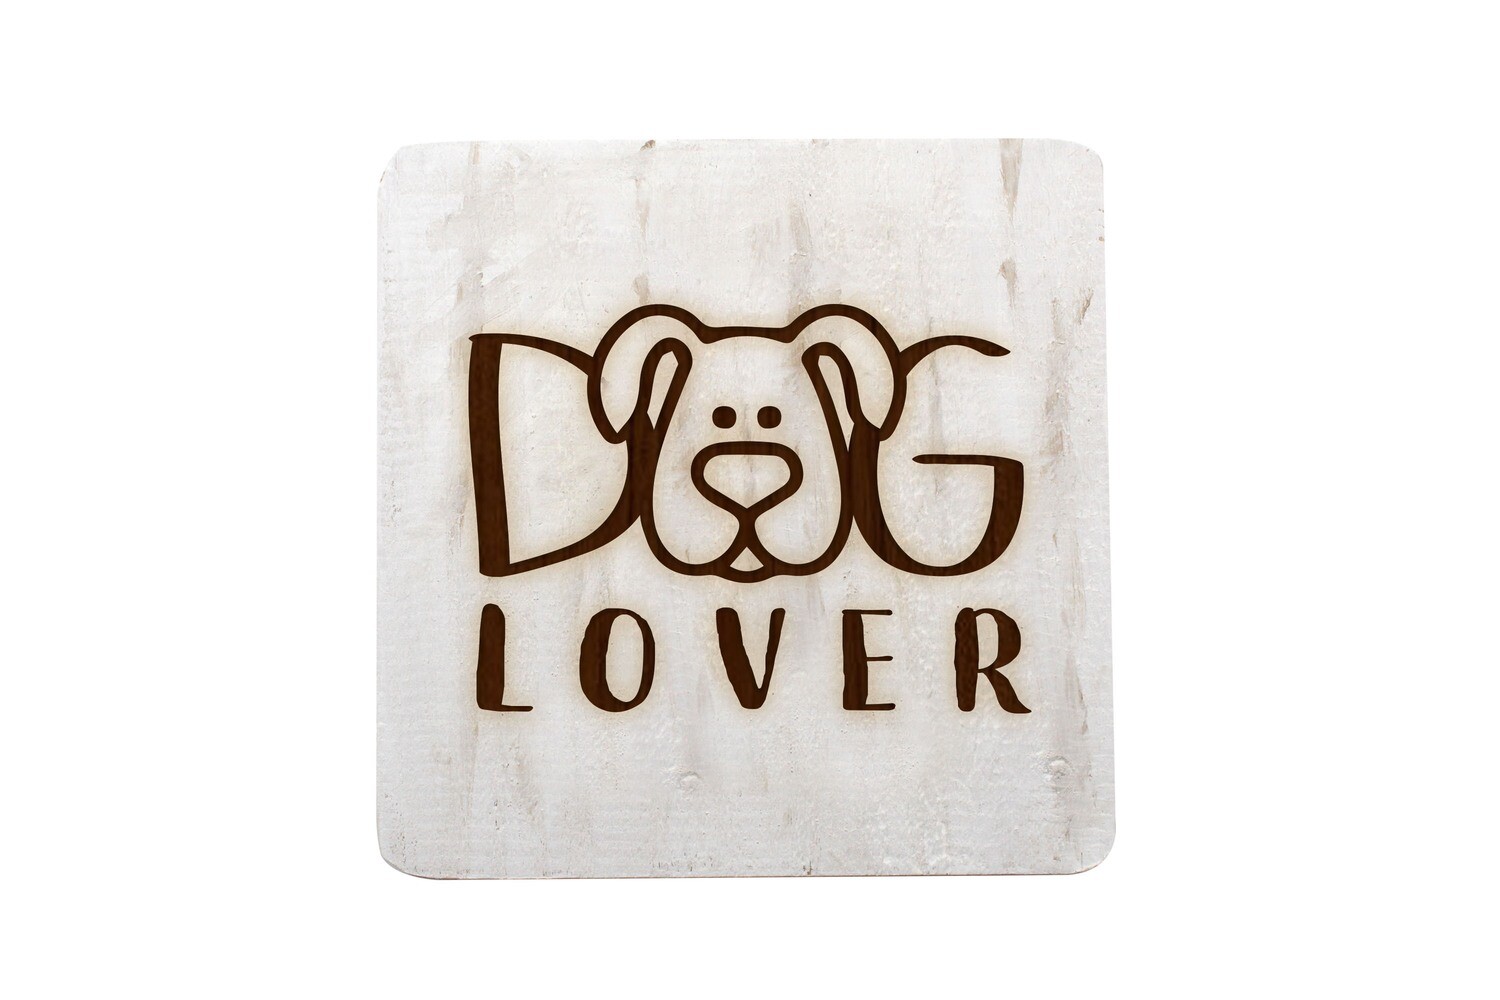 Dog or Cat Lover Image on Hand-Painted Wood Coaster Set